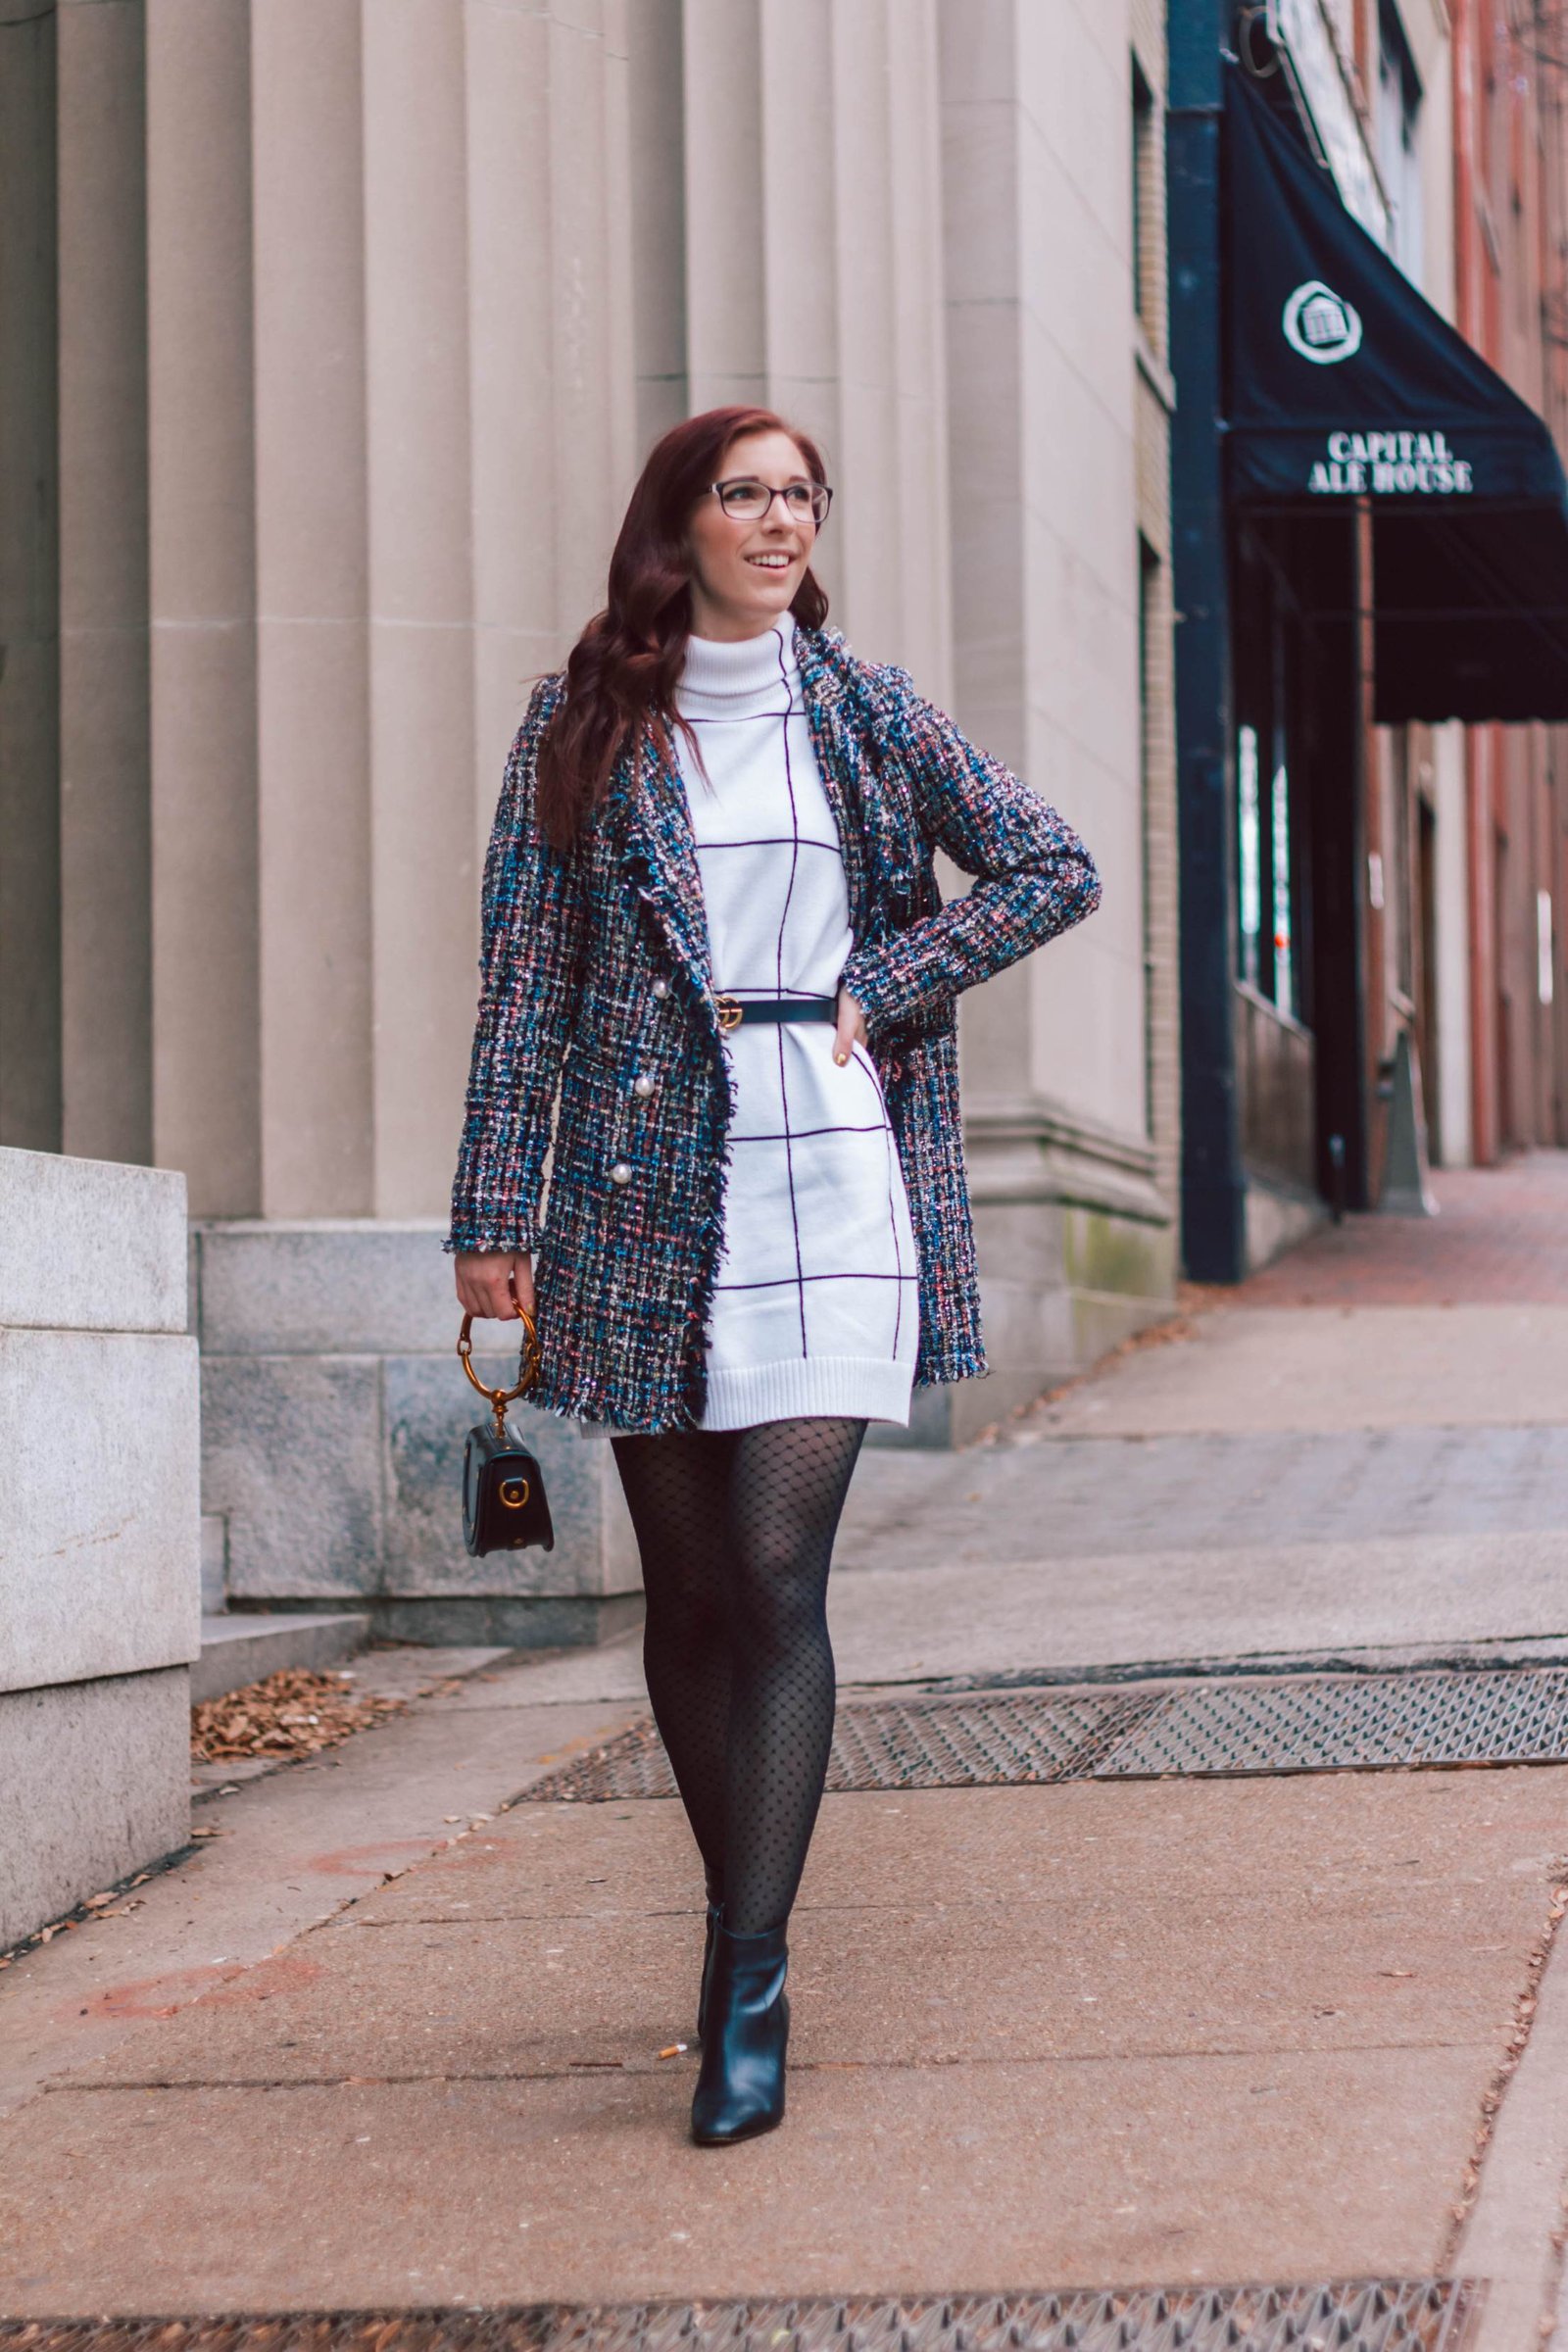 Sweater + Dress + Tights = Perfect Winter Layering — Blog by MP